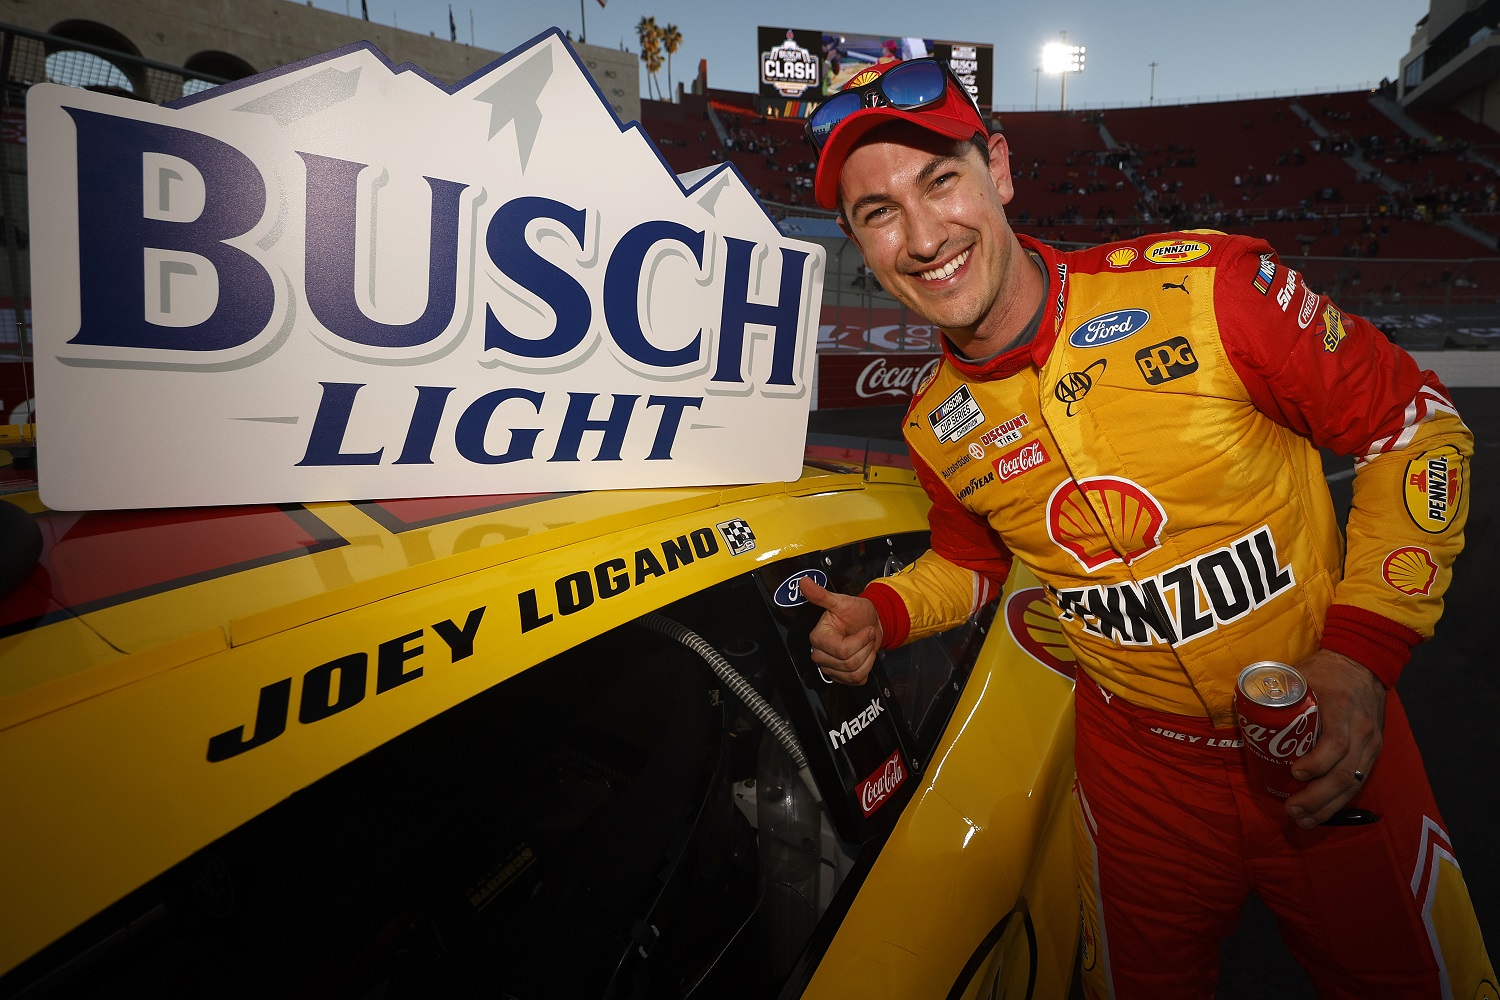 Joey Logano poses after placing the winner's sticker in Victory Lane after winning the NASCAR Cup Series Busch Light Clash at the Los Angeles Memorial Coliseum.